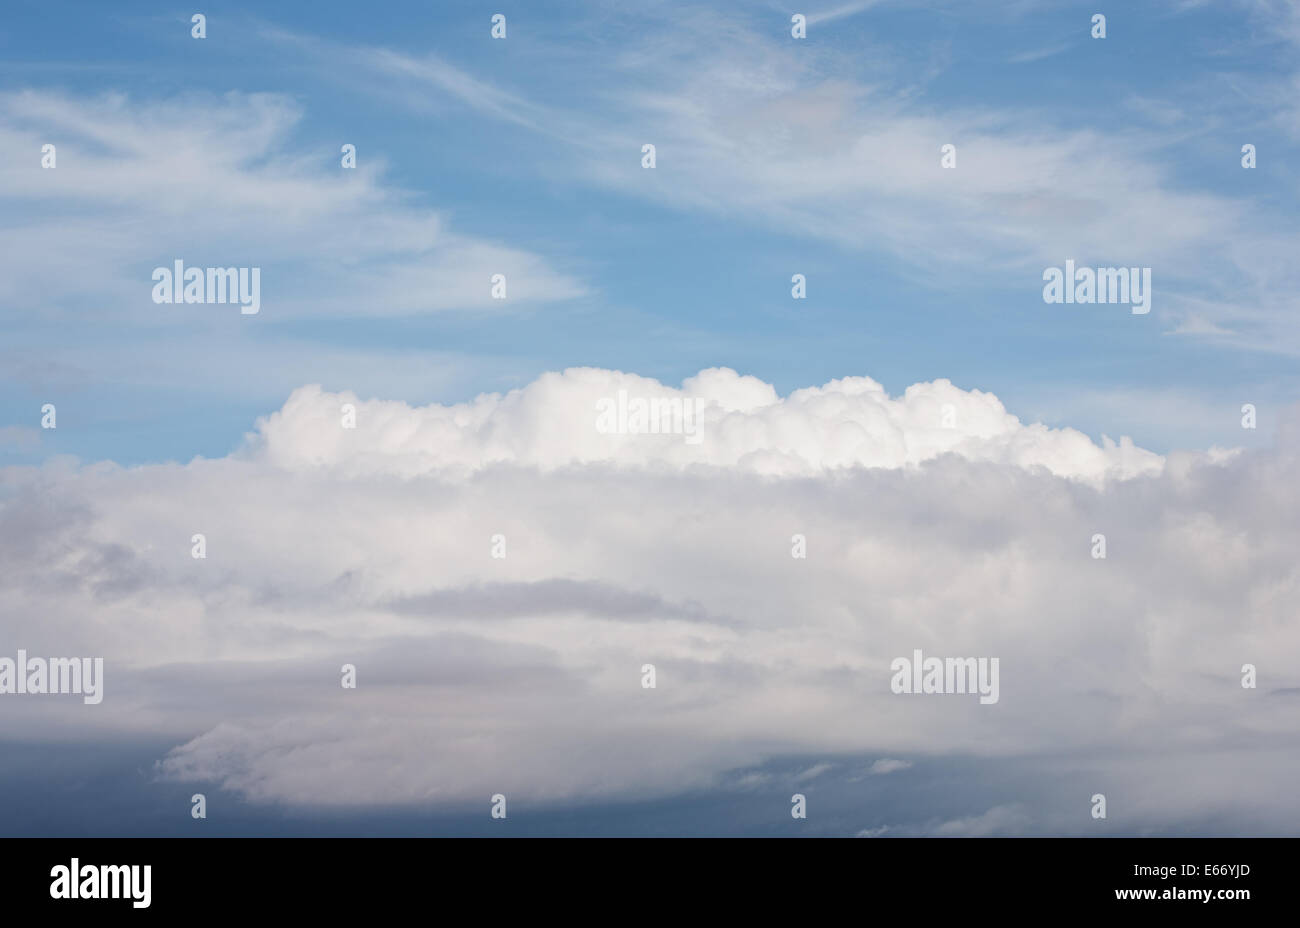 Dramatic sky with Cumulus, Cirrus and Stratus clouds. Stock Photo